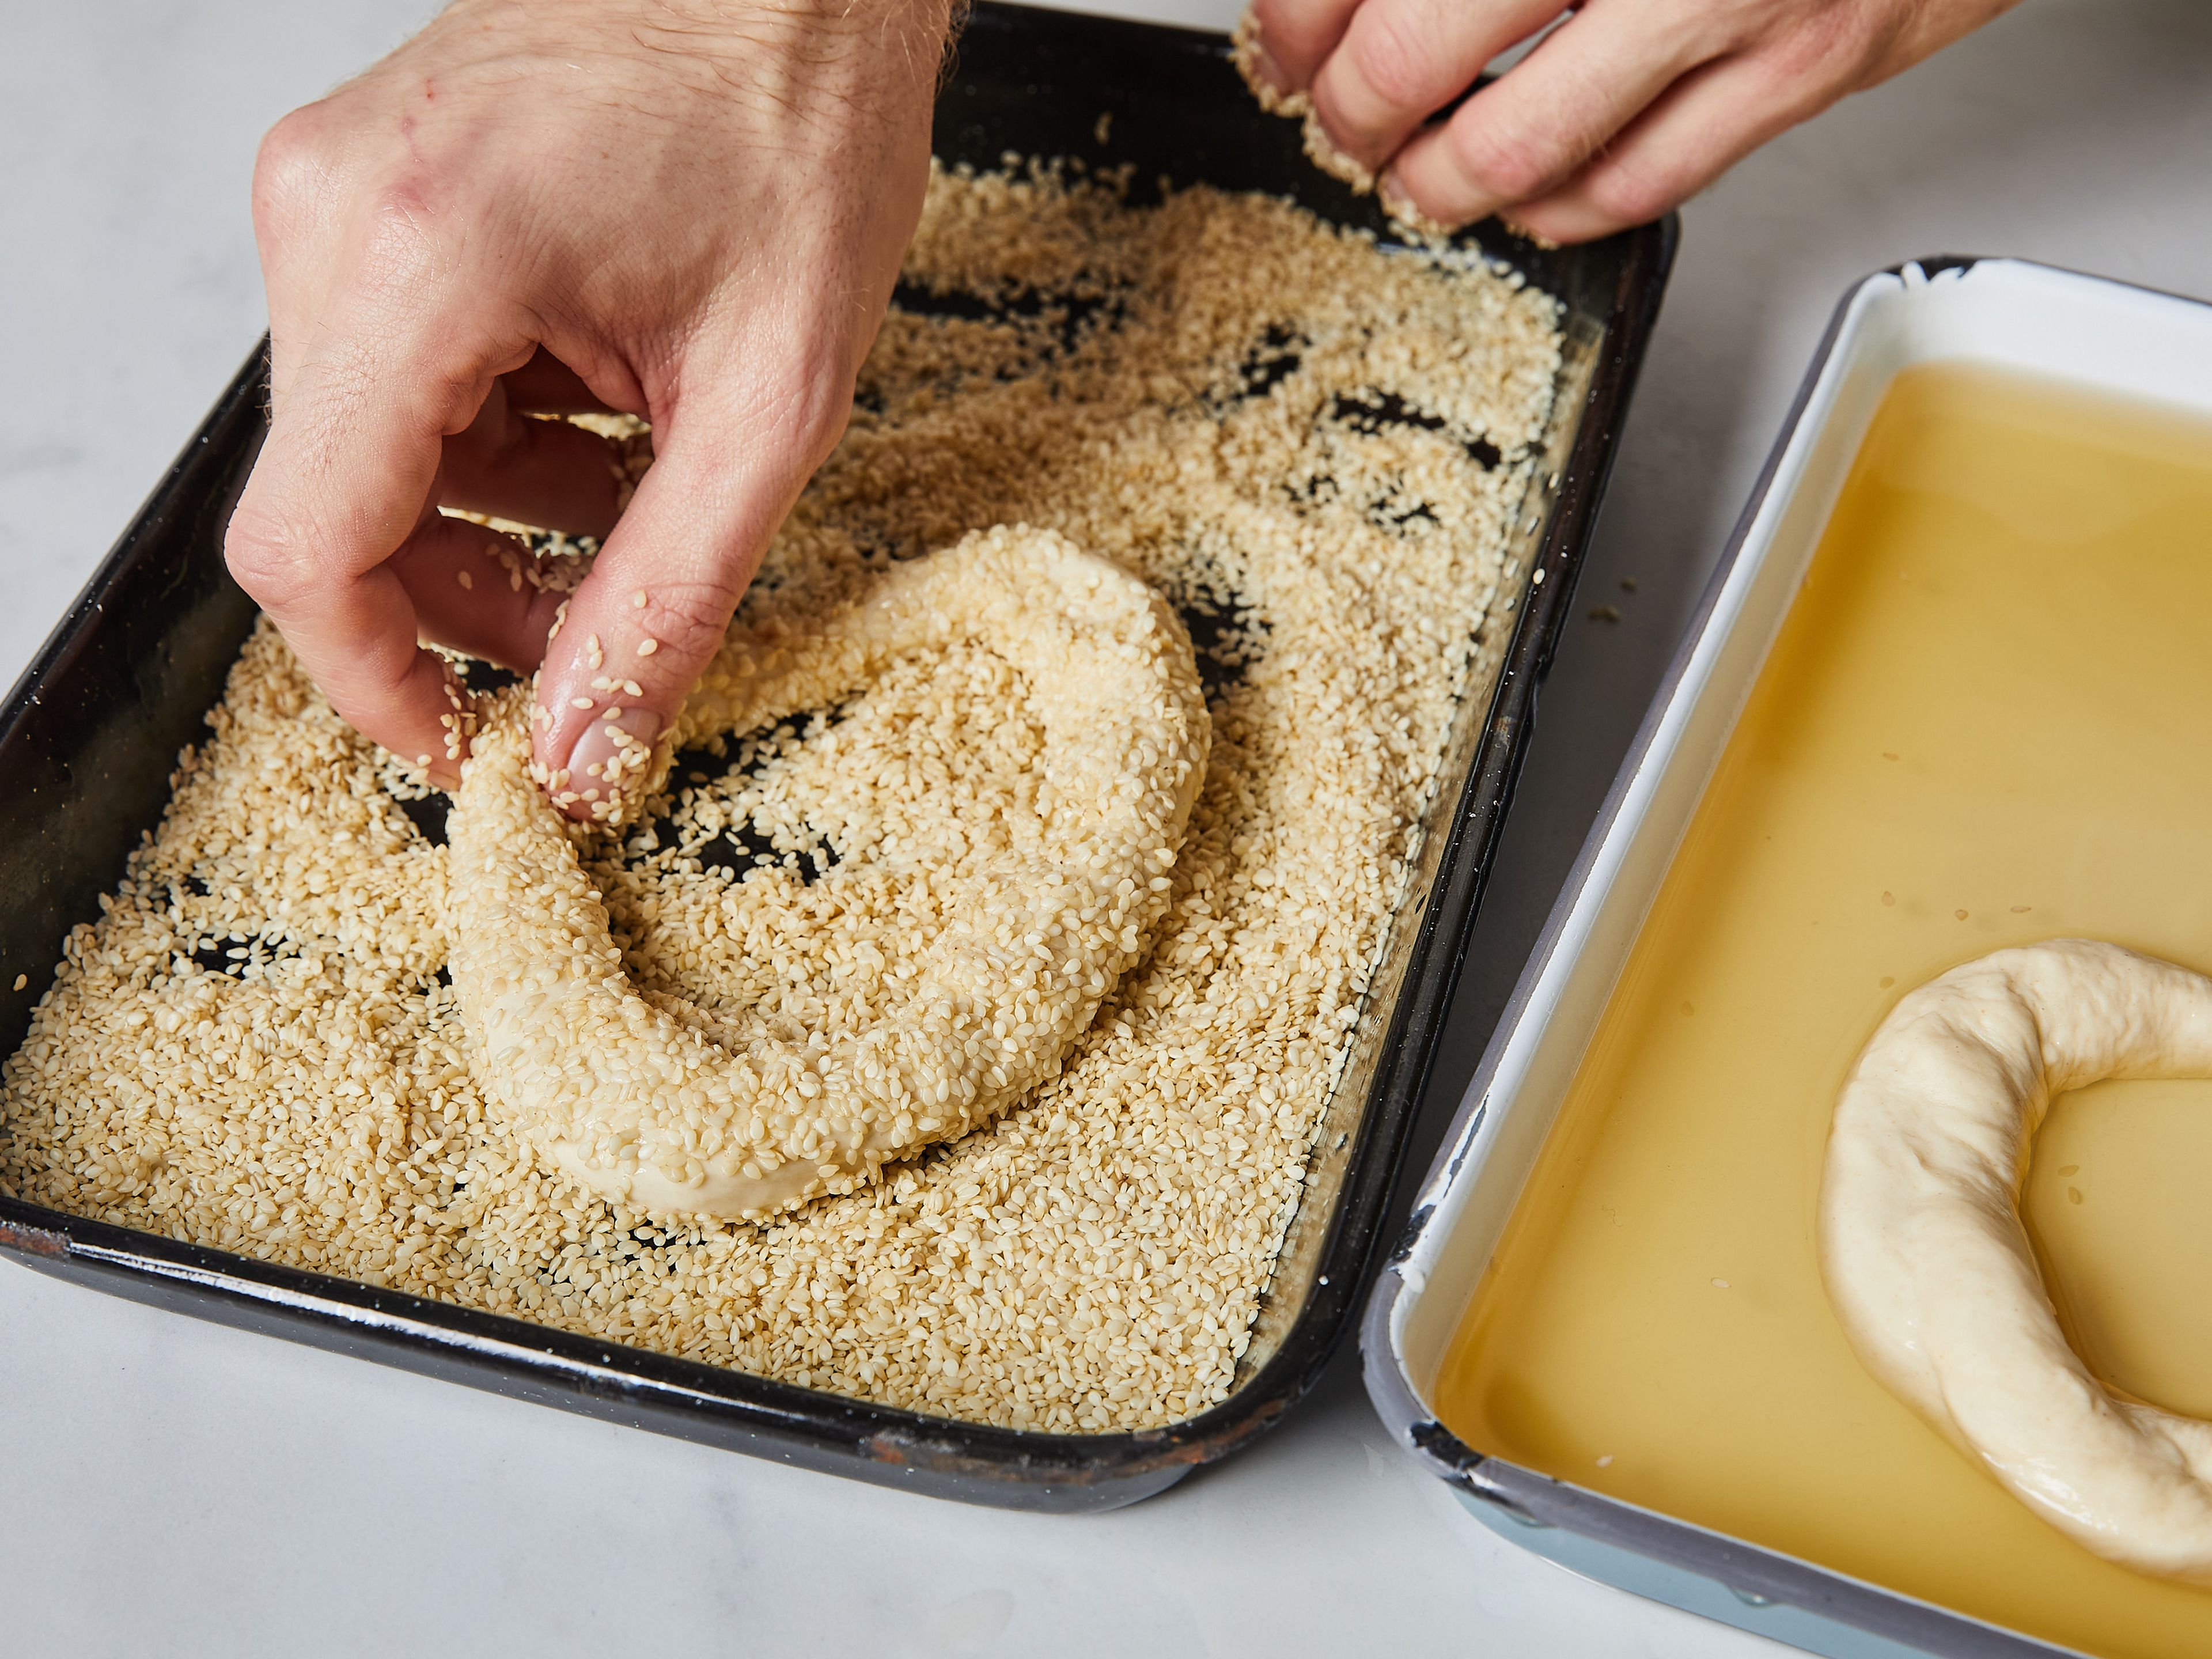 Prepare two baking sheets with parchment paper. Dip the ring into the honey water, and then transfer to sesame seeds. Make sure the ring is completely covered in sesame seeds before transferring to baking sheet with parchment paper. Repeat with remaining rings. Let the rings rest for 45 min.